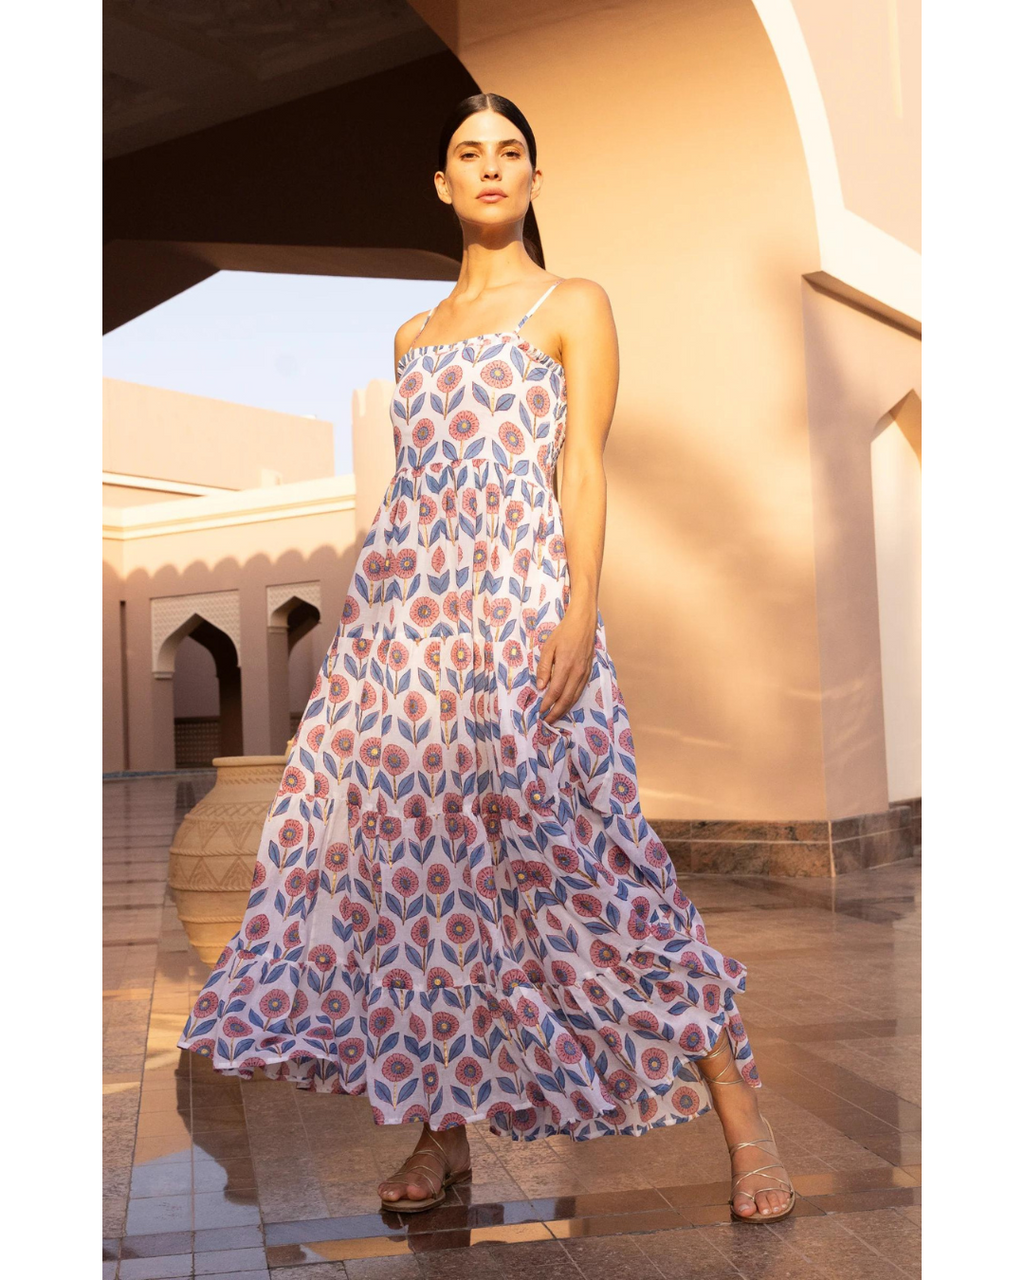 An elegant woman stands in a sunlit architectural setting, wearing a flowing maxi dress adorned with a vibrant pink and blue pattern. The dress features delicate straps and tiered ruffles, complementing her poised stance.